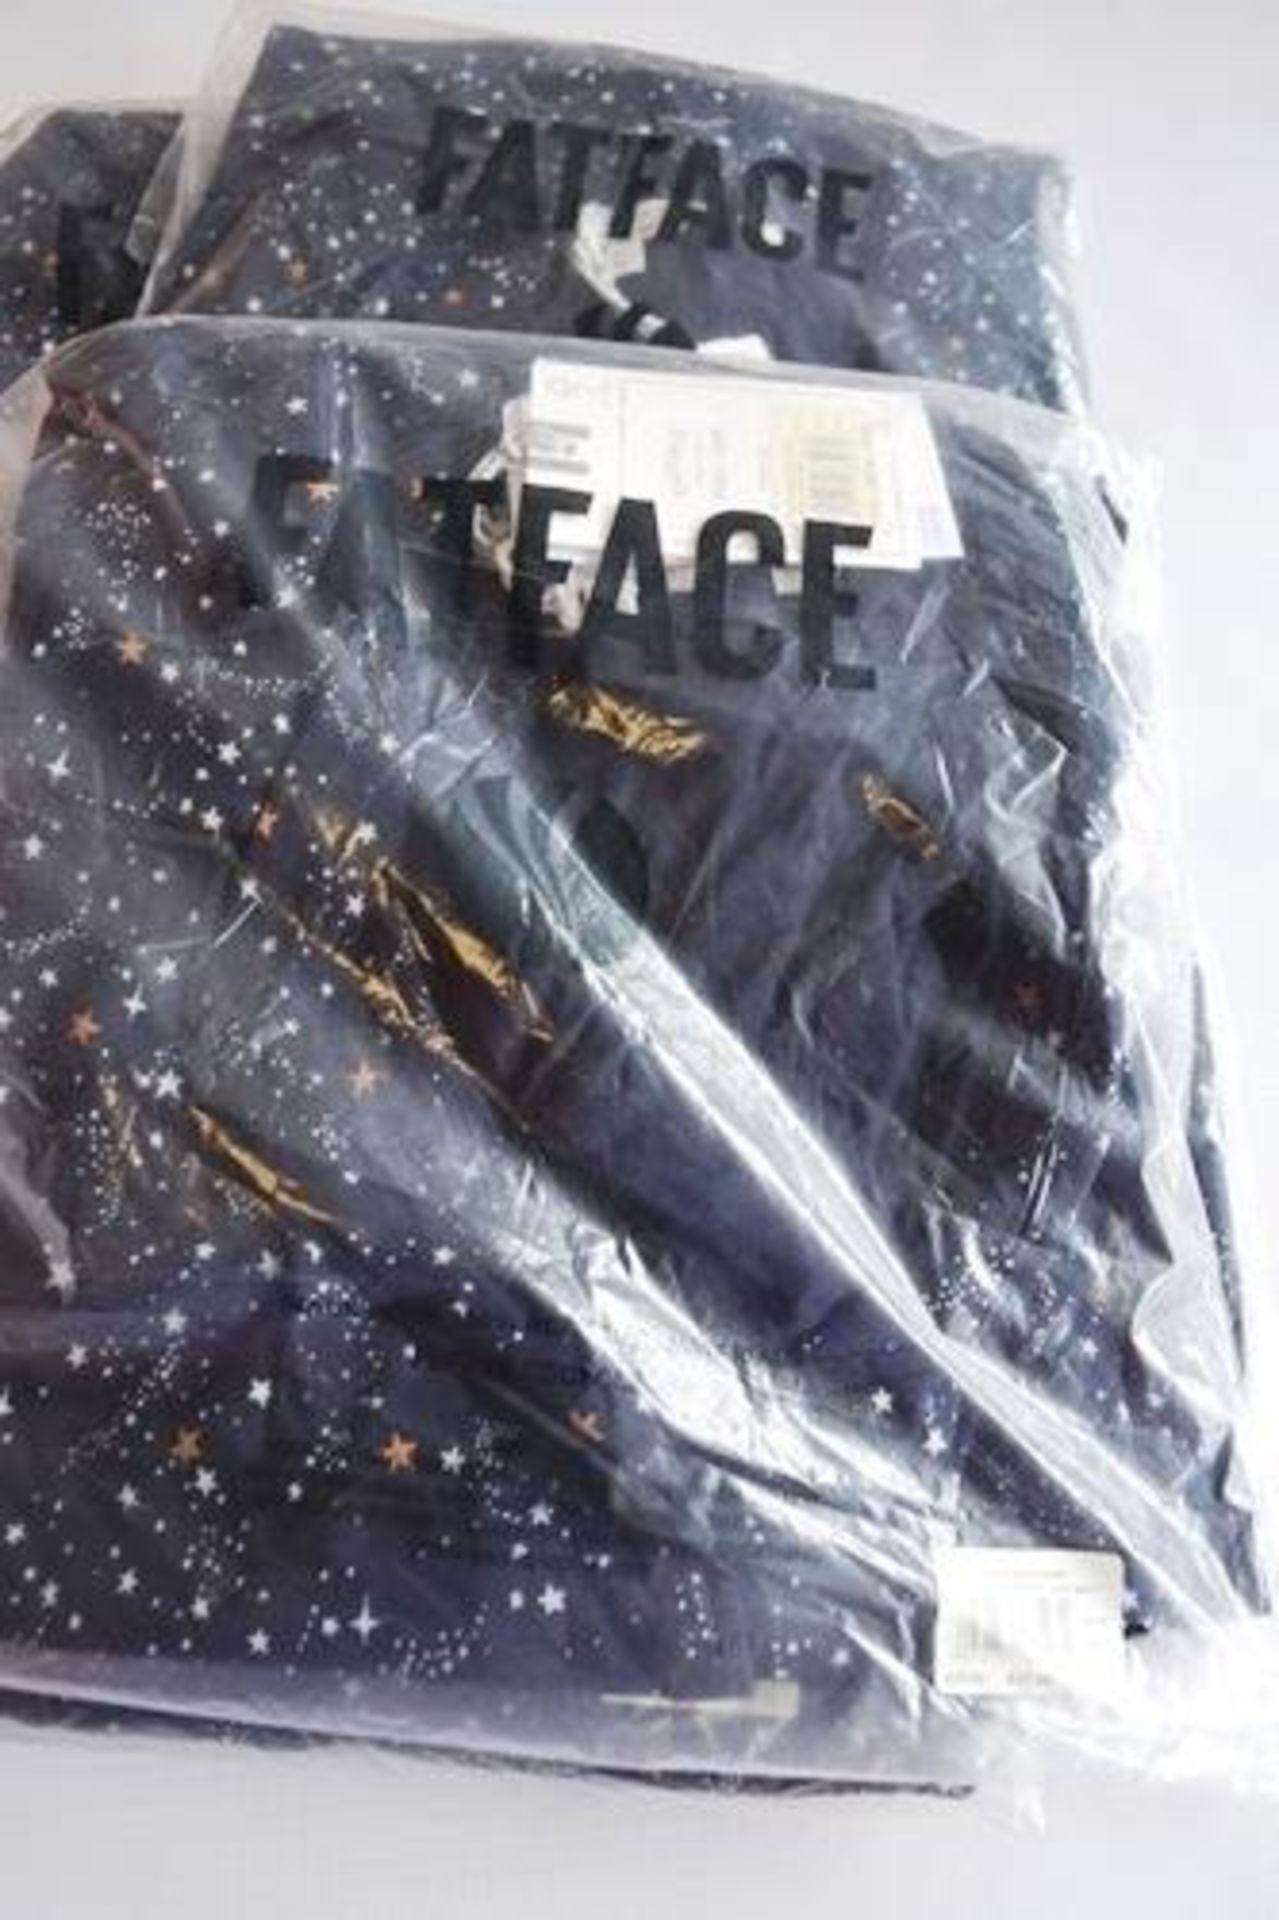 5 x Fat Face ladies night stars jersey shirts in assorted sizes - New with tags (EB4)